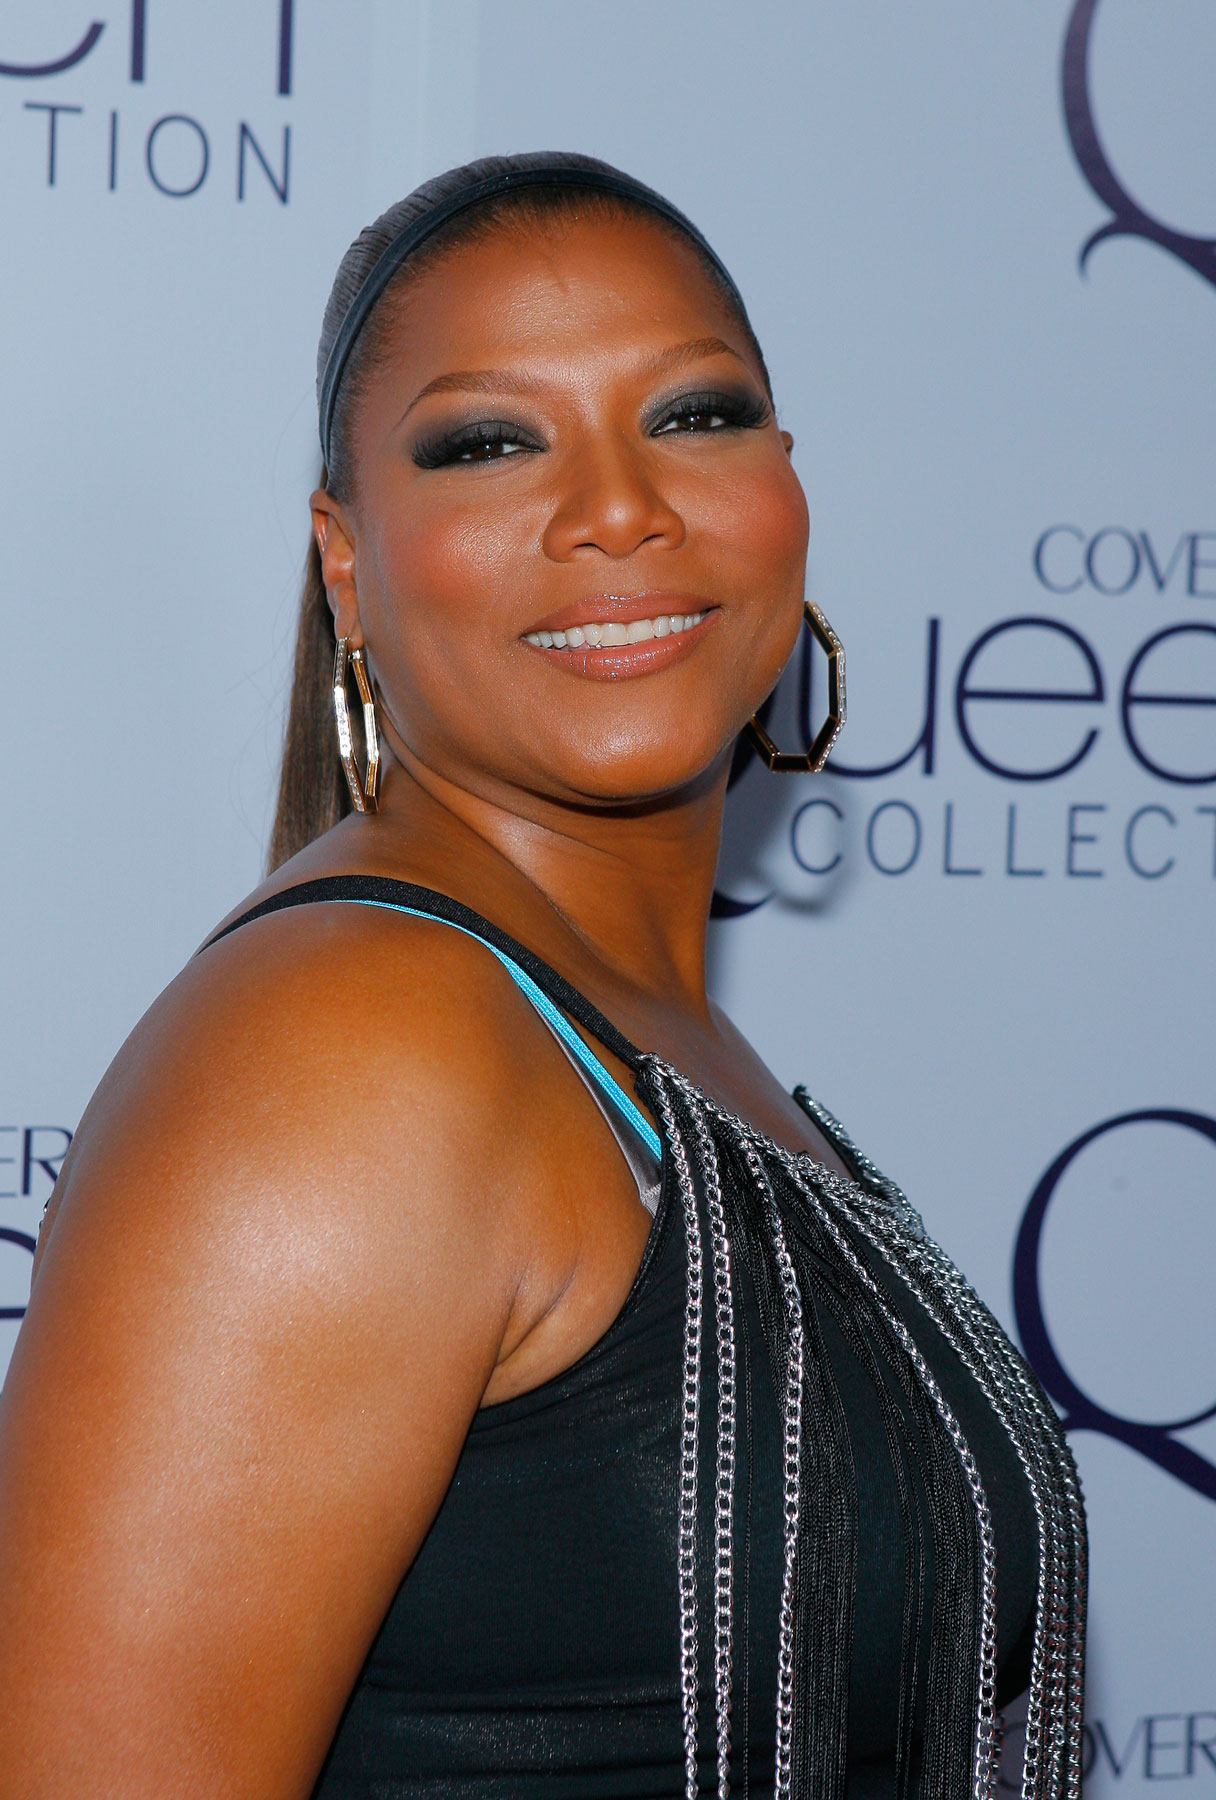 There are 64 more pics in the Queen Latifah photo gallery. 